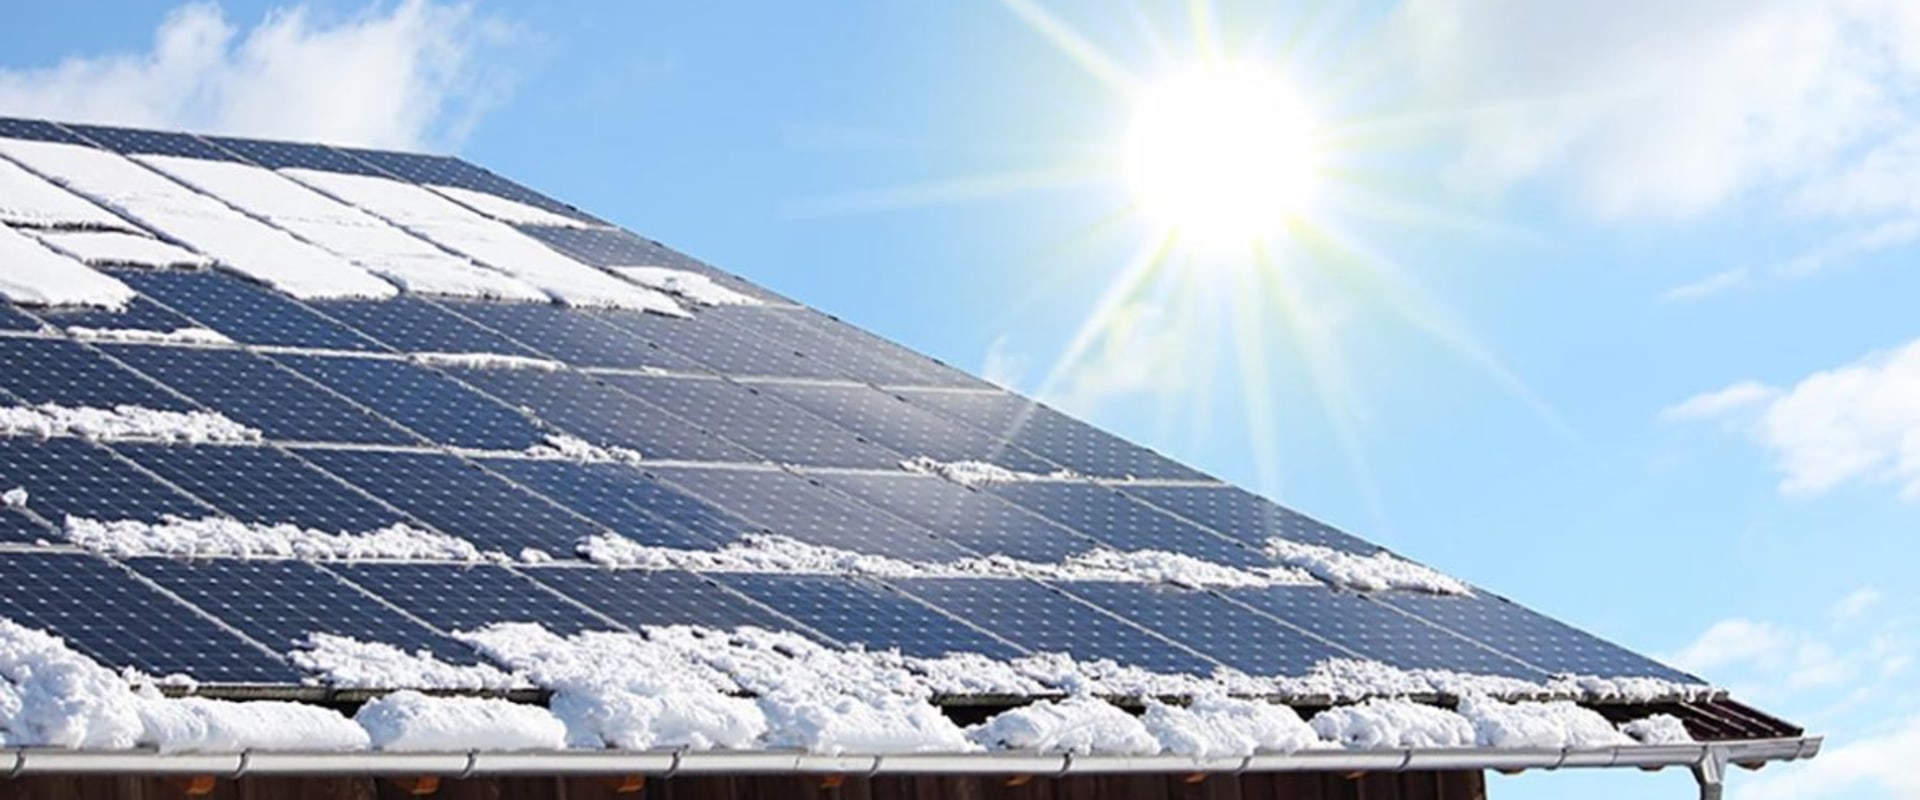 When does solar power come out?